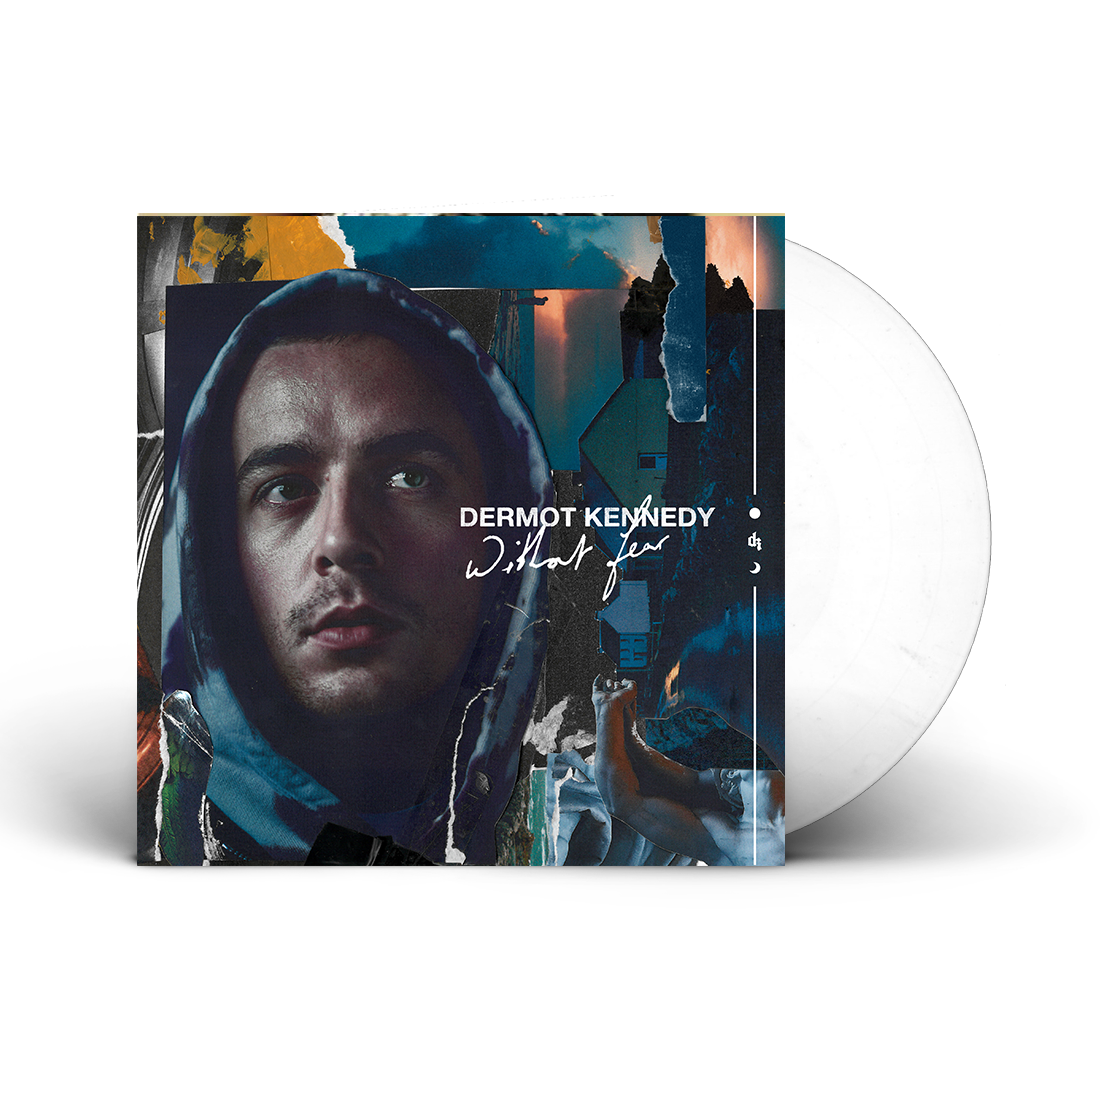 Dermot Kennedy - Without Fear: Limited Edition White Vinyl